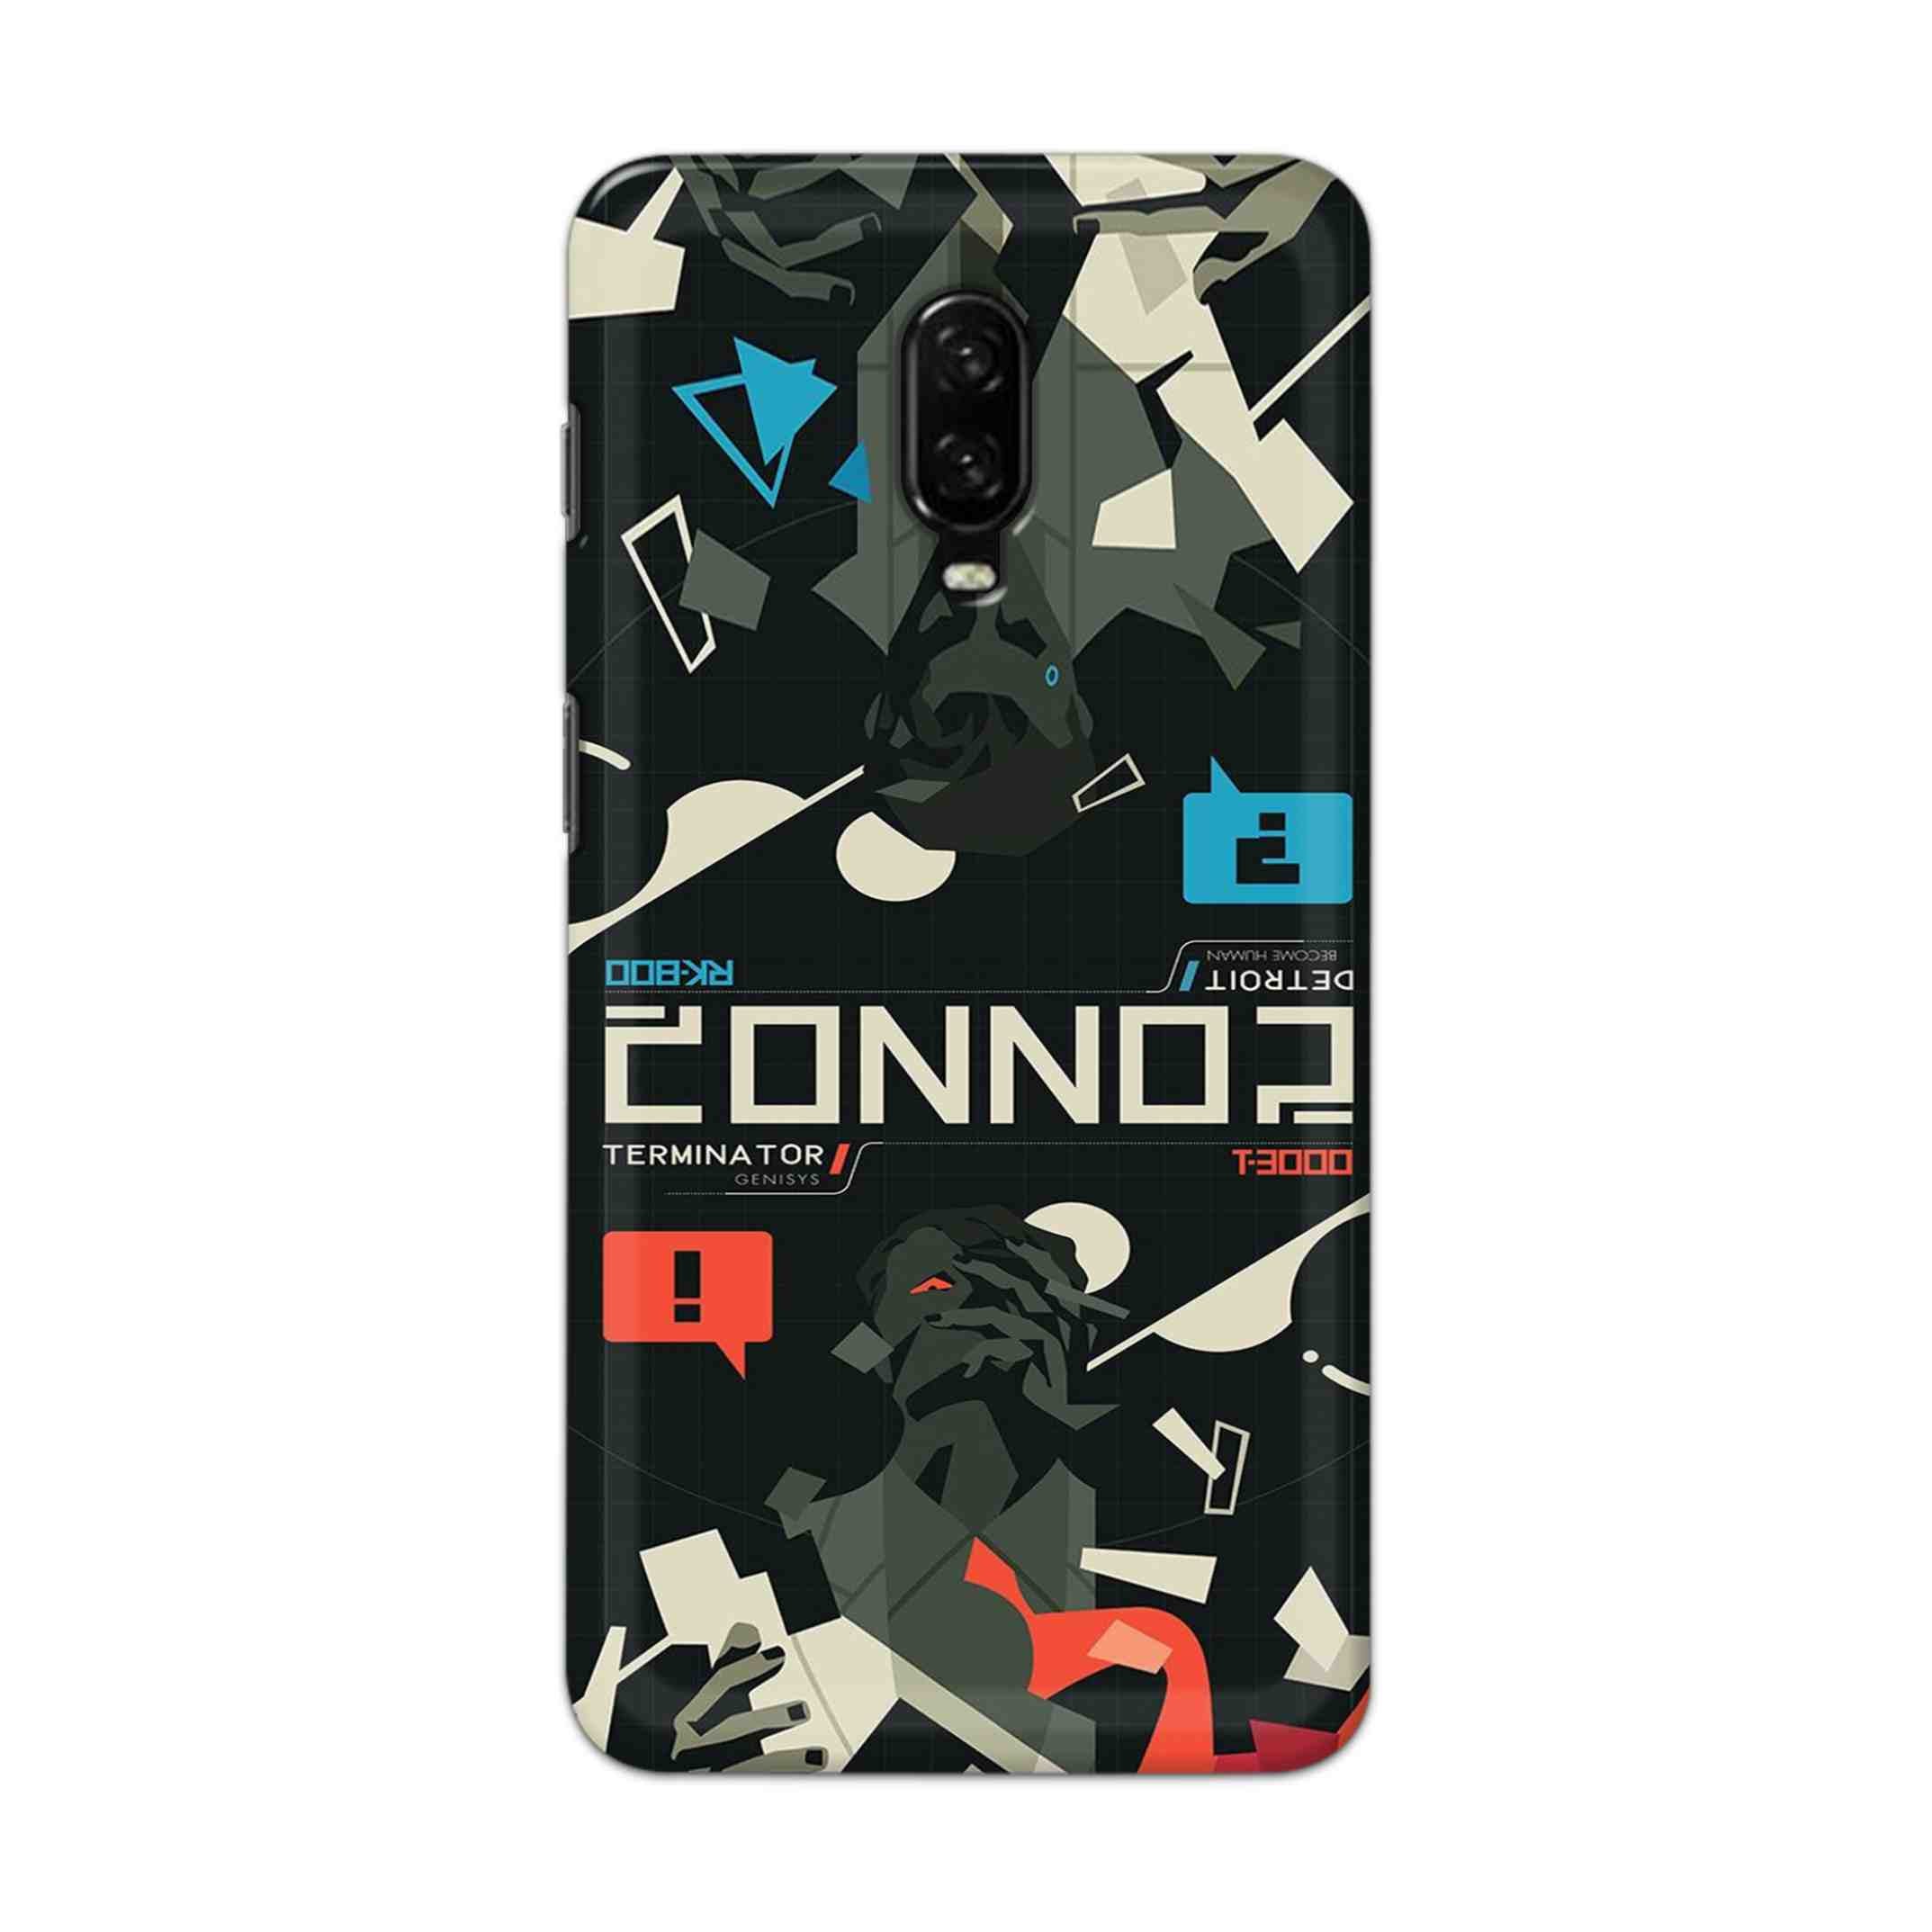 Buy Terminator Hard Back Mobile Phone Case Cover For OnePlus 6T Online